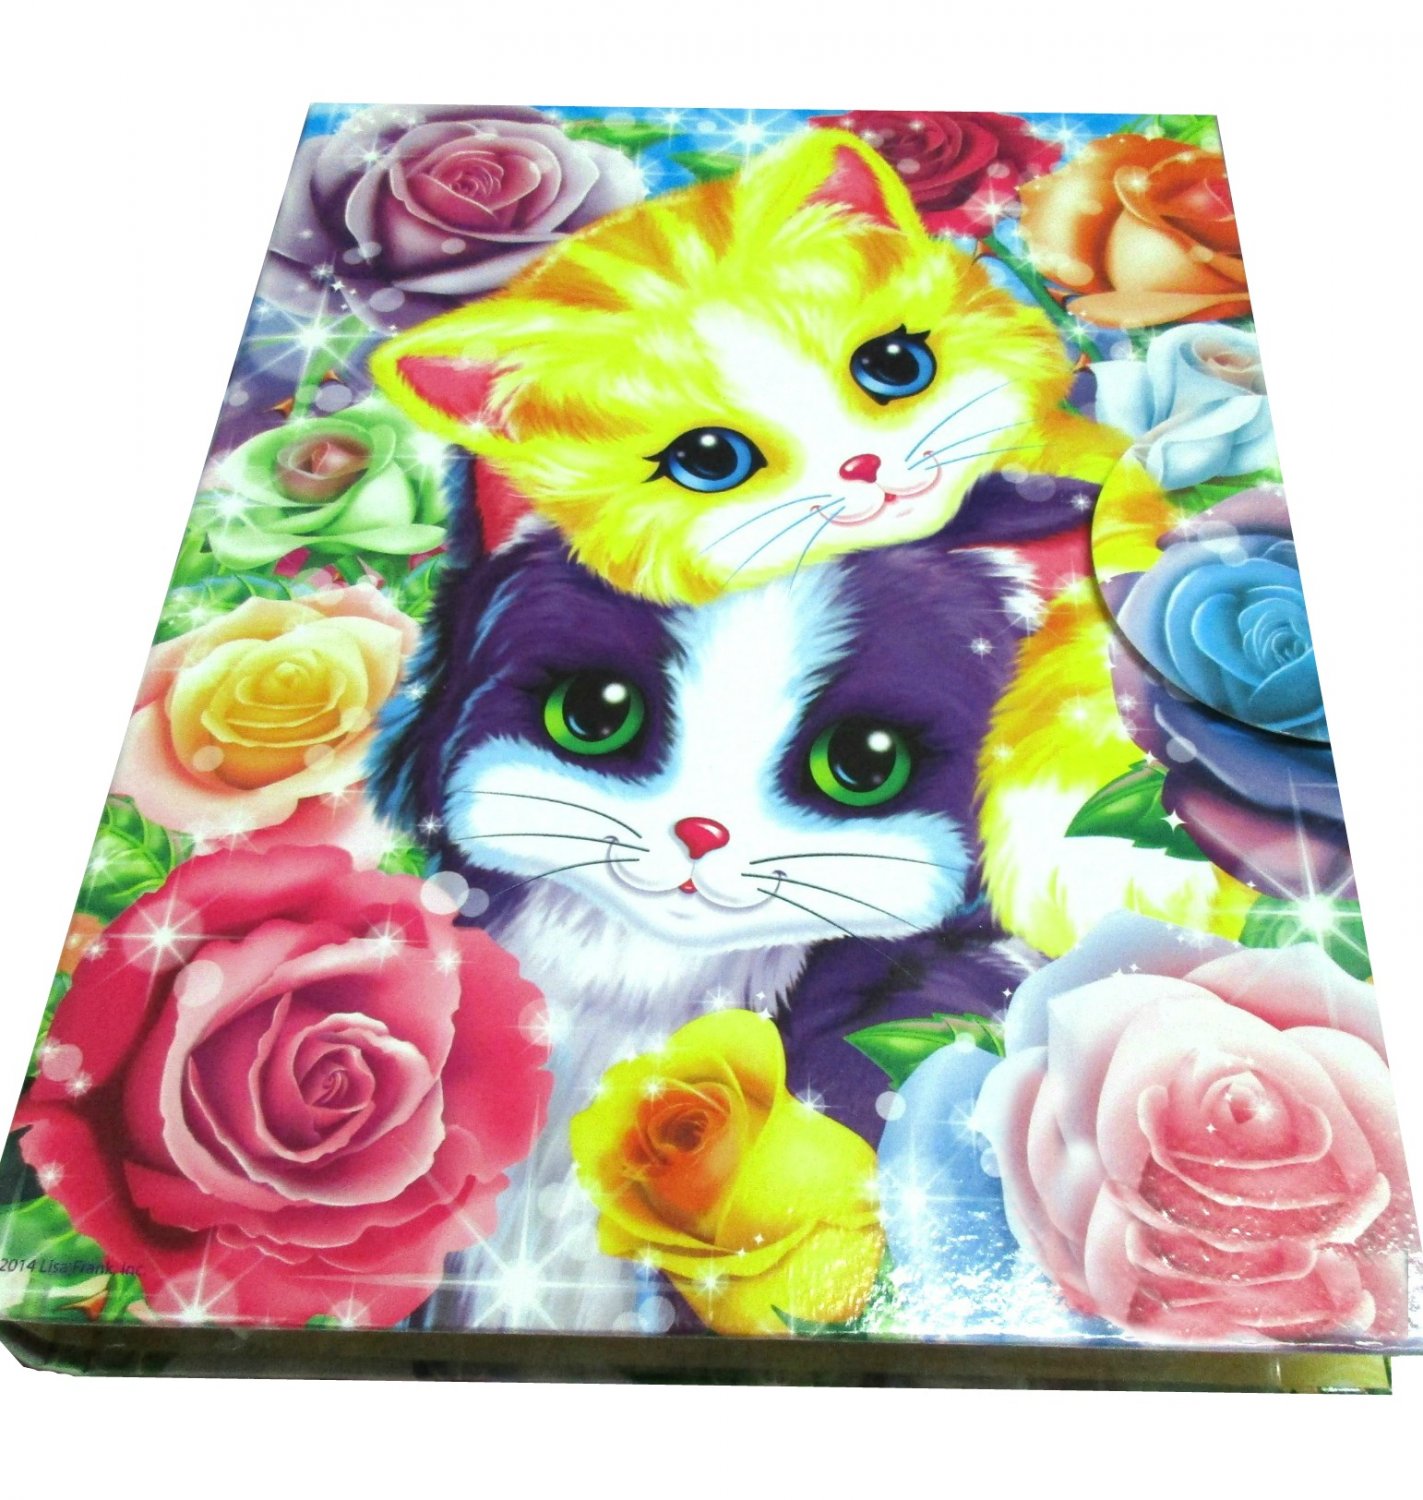 Lisa Frank Binder with 3 Puzzles- Stationery & Puzzle Holder Kittens